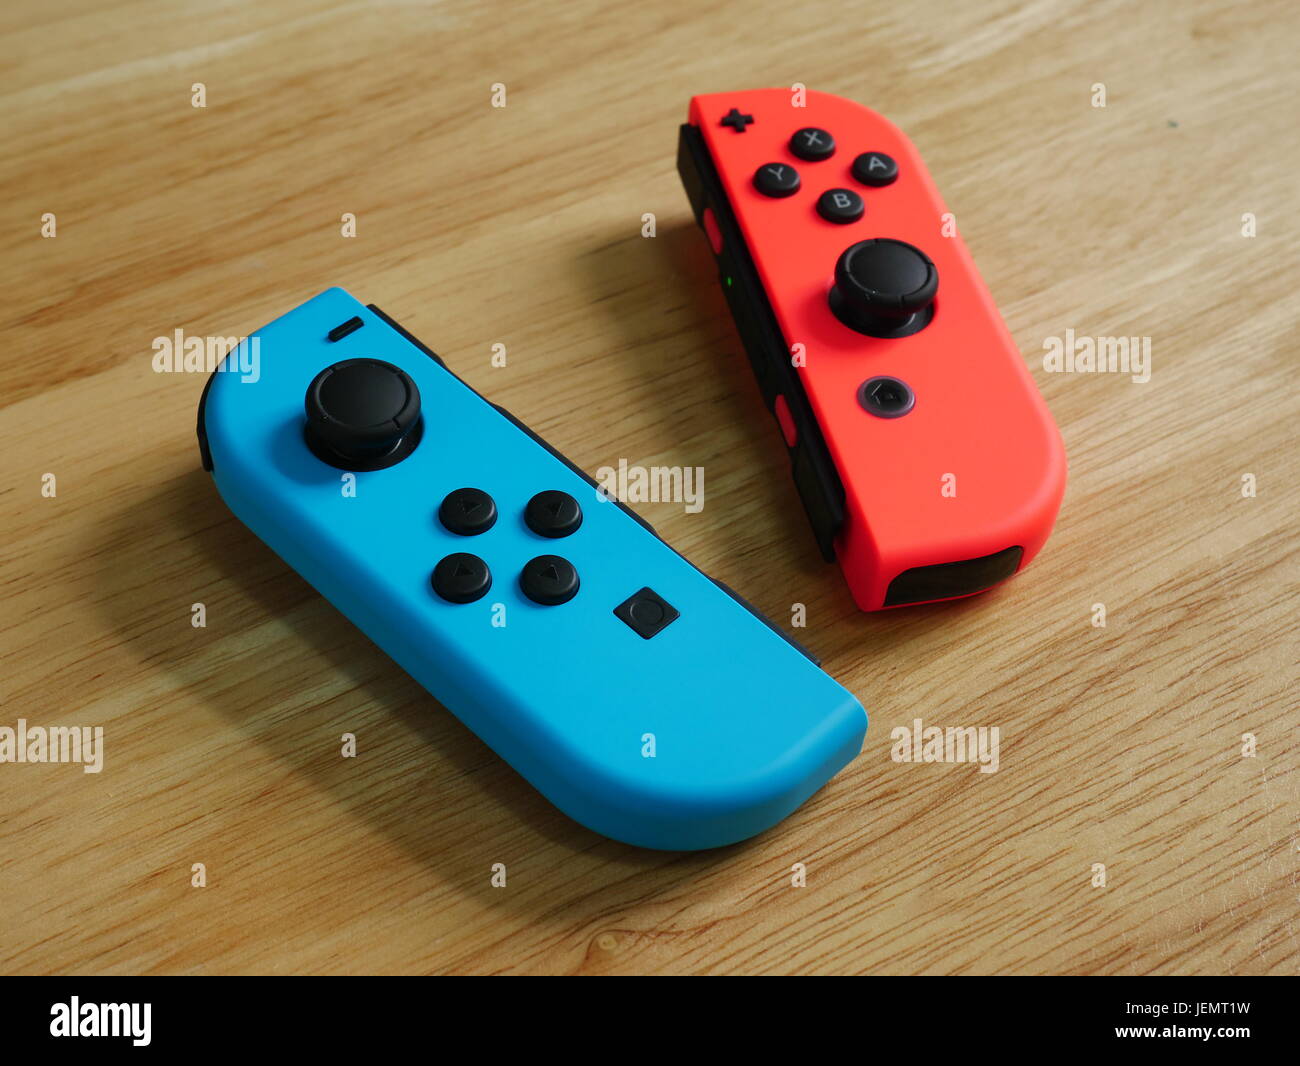 Bangkok, Thailand - June 25, 2017 : Nintendo Switch controllers on wooden table. Stock Photo